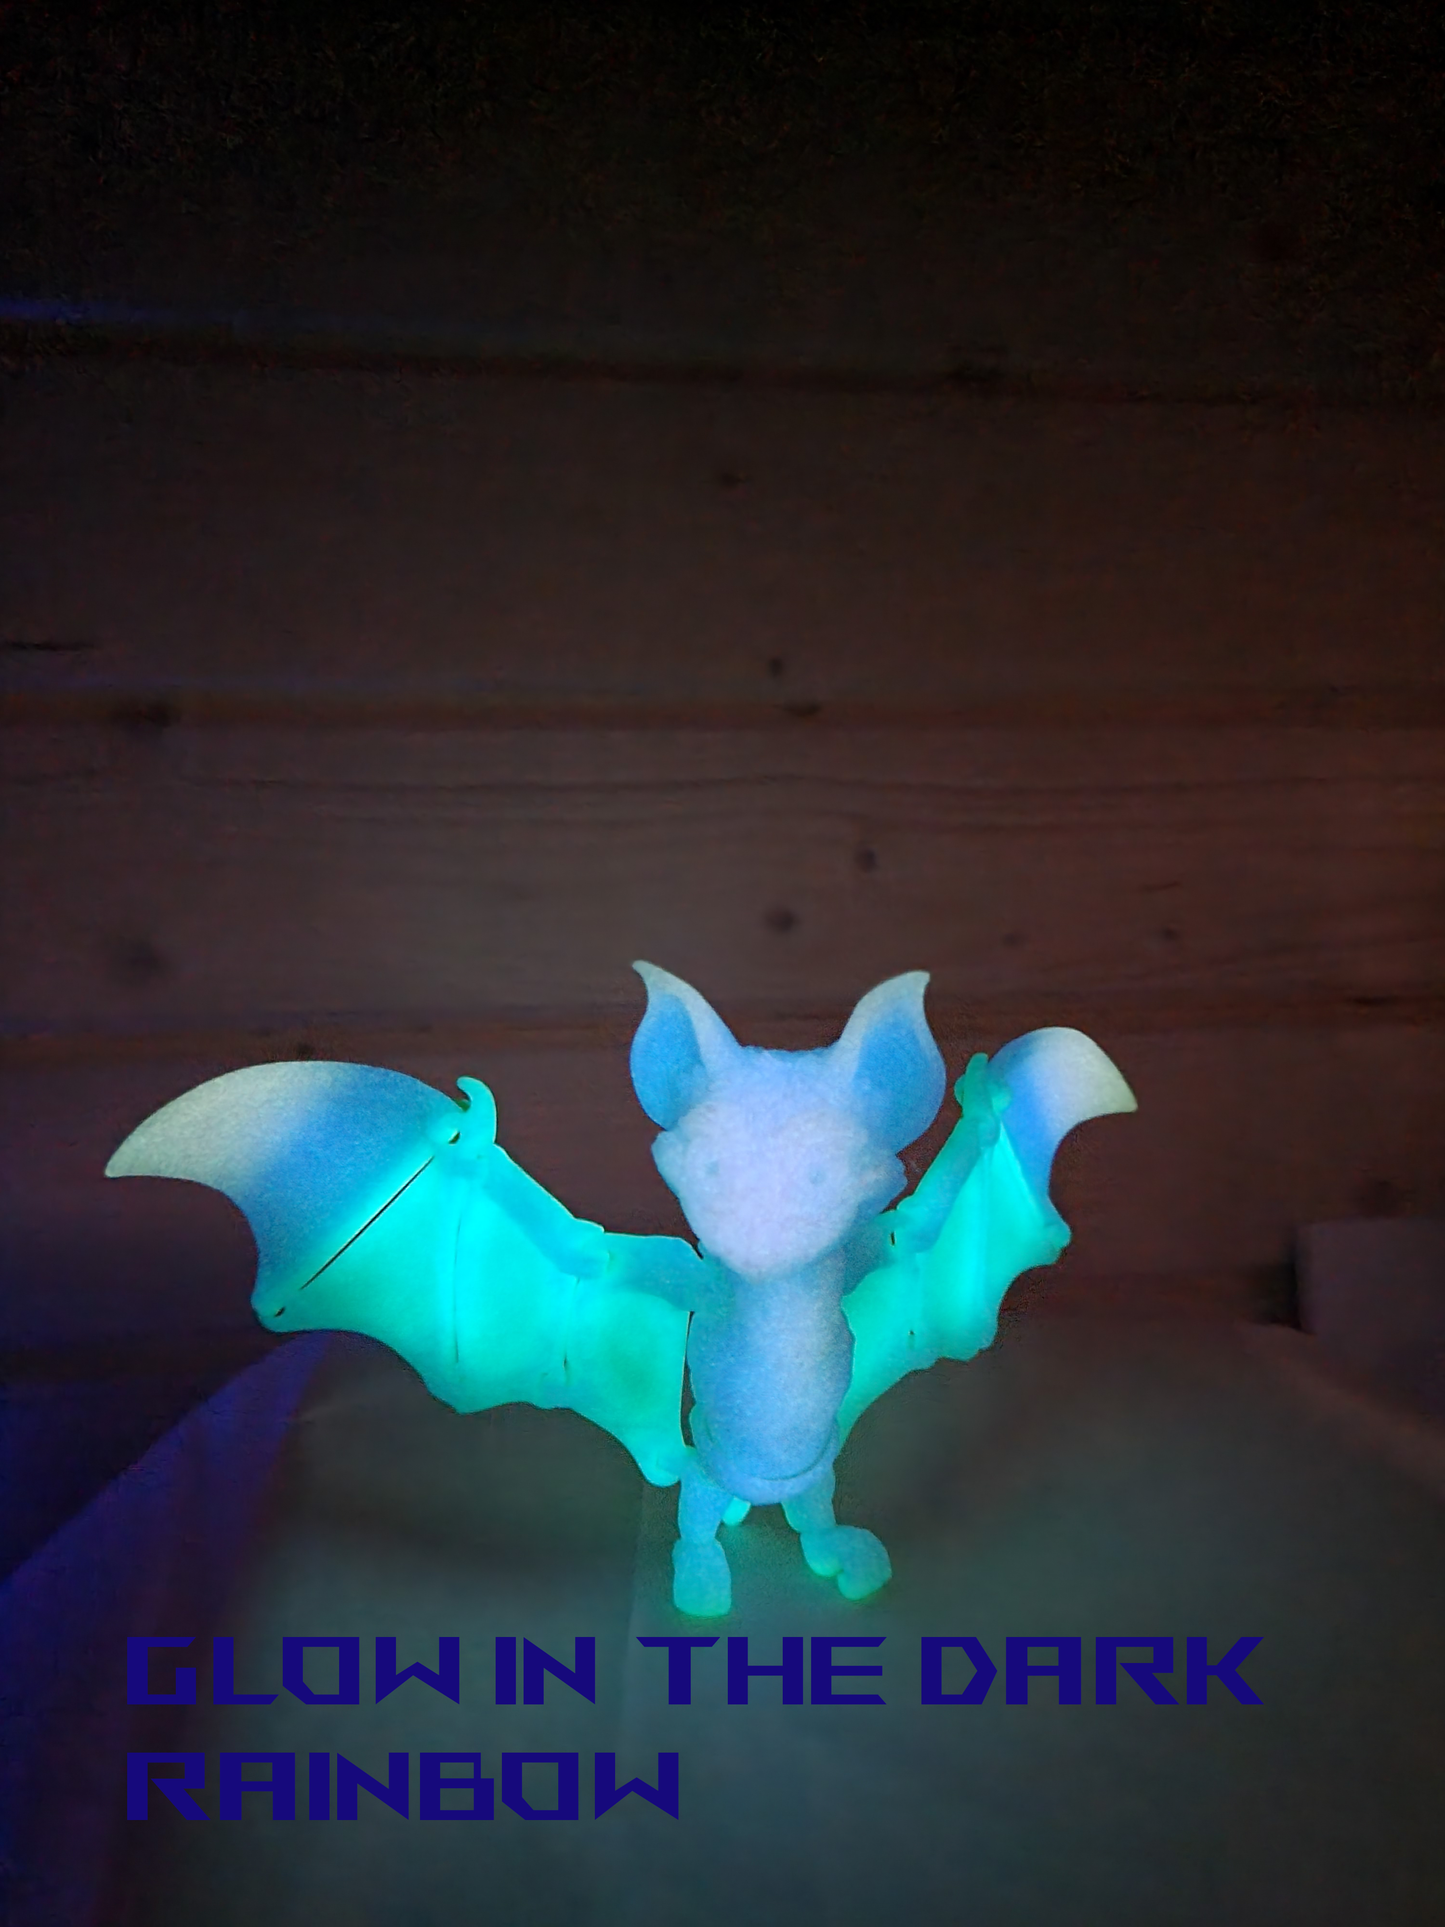 Articulated Bat - 3D Printed - Matmire makes